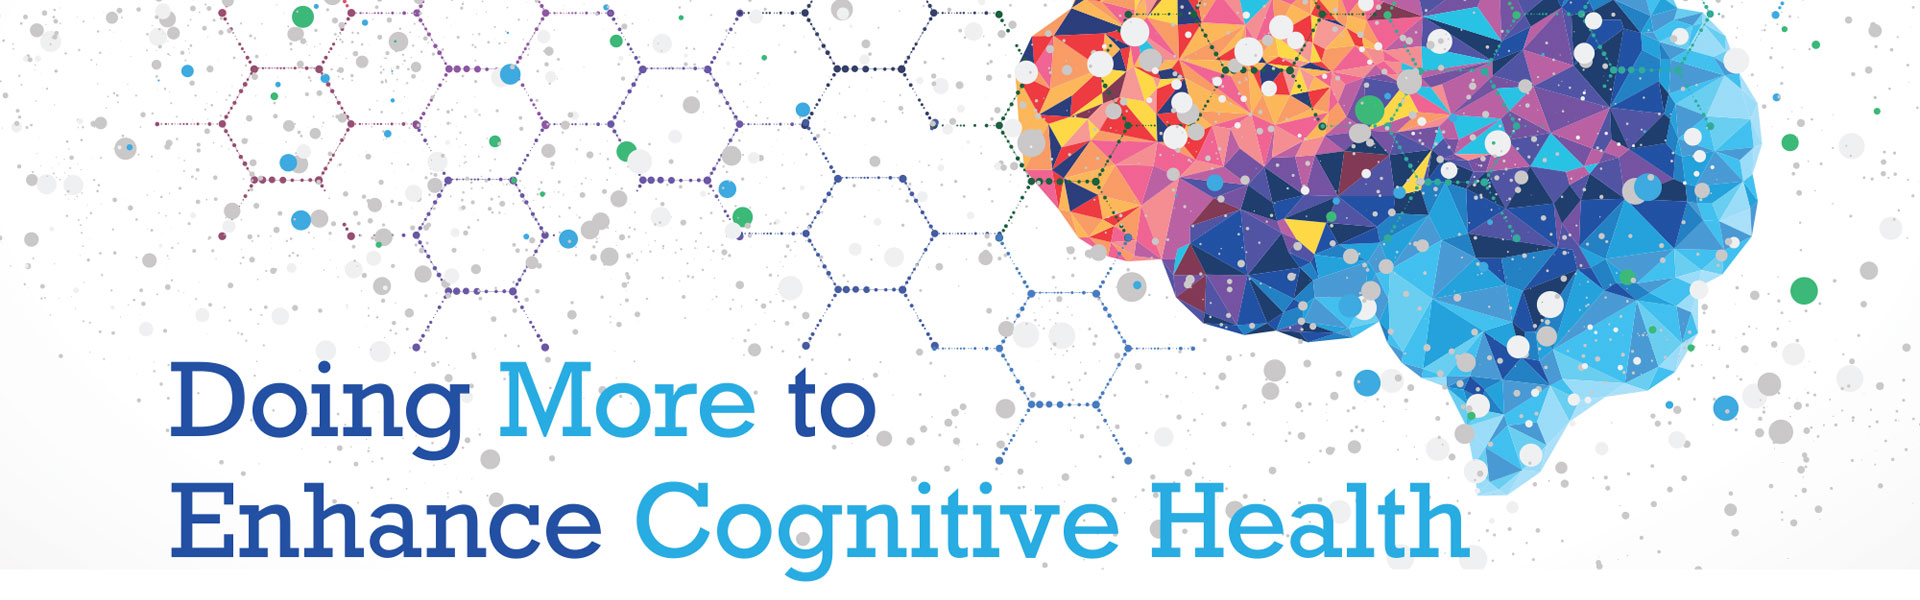 Doing More to Enhance Cognitive Health